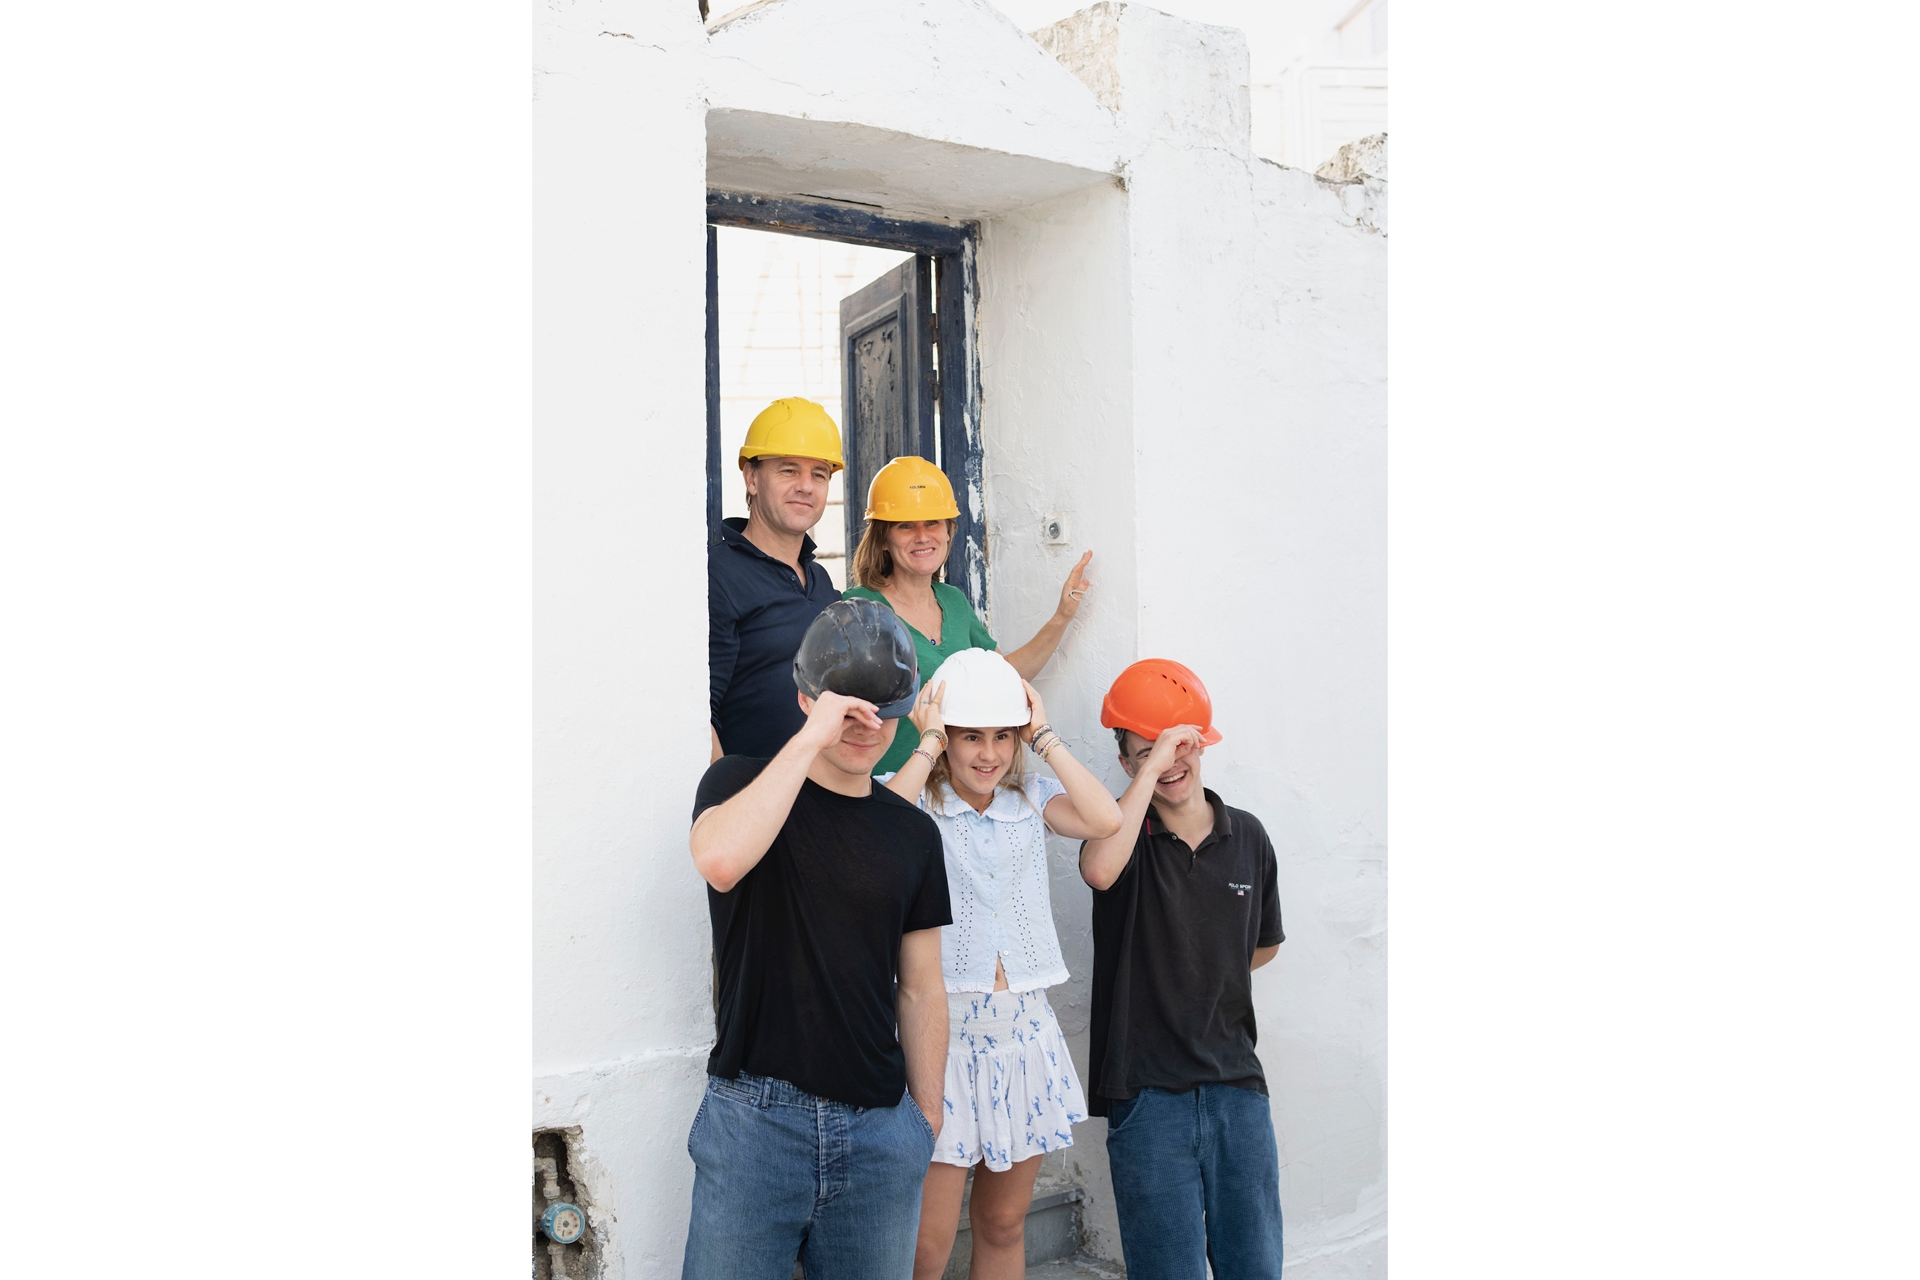 Sarah Moore and her family on the building site